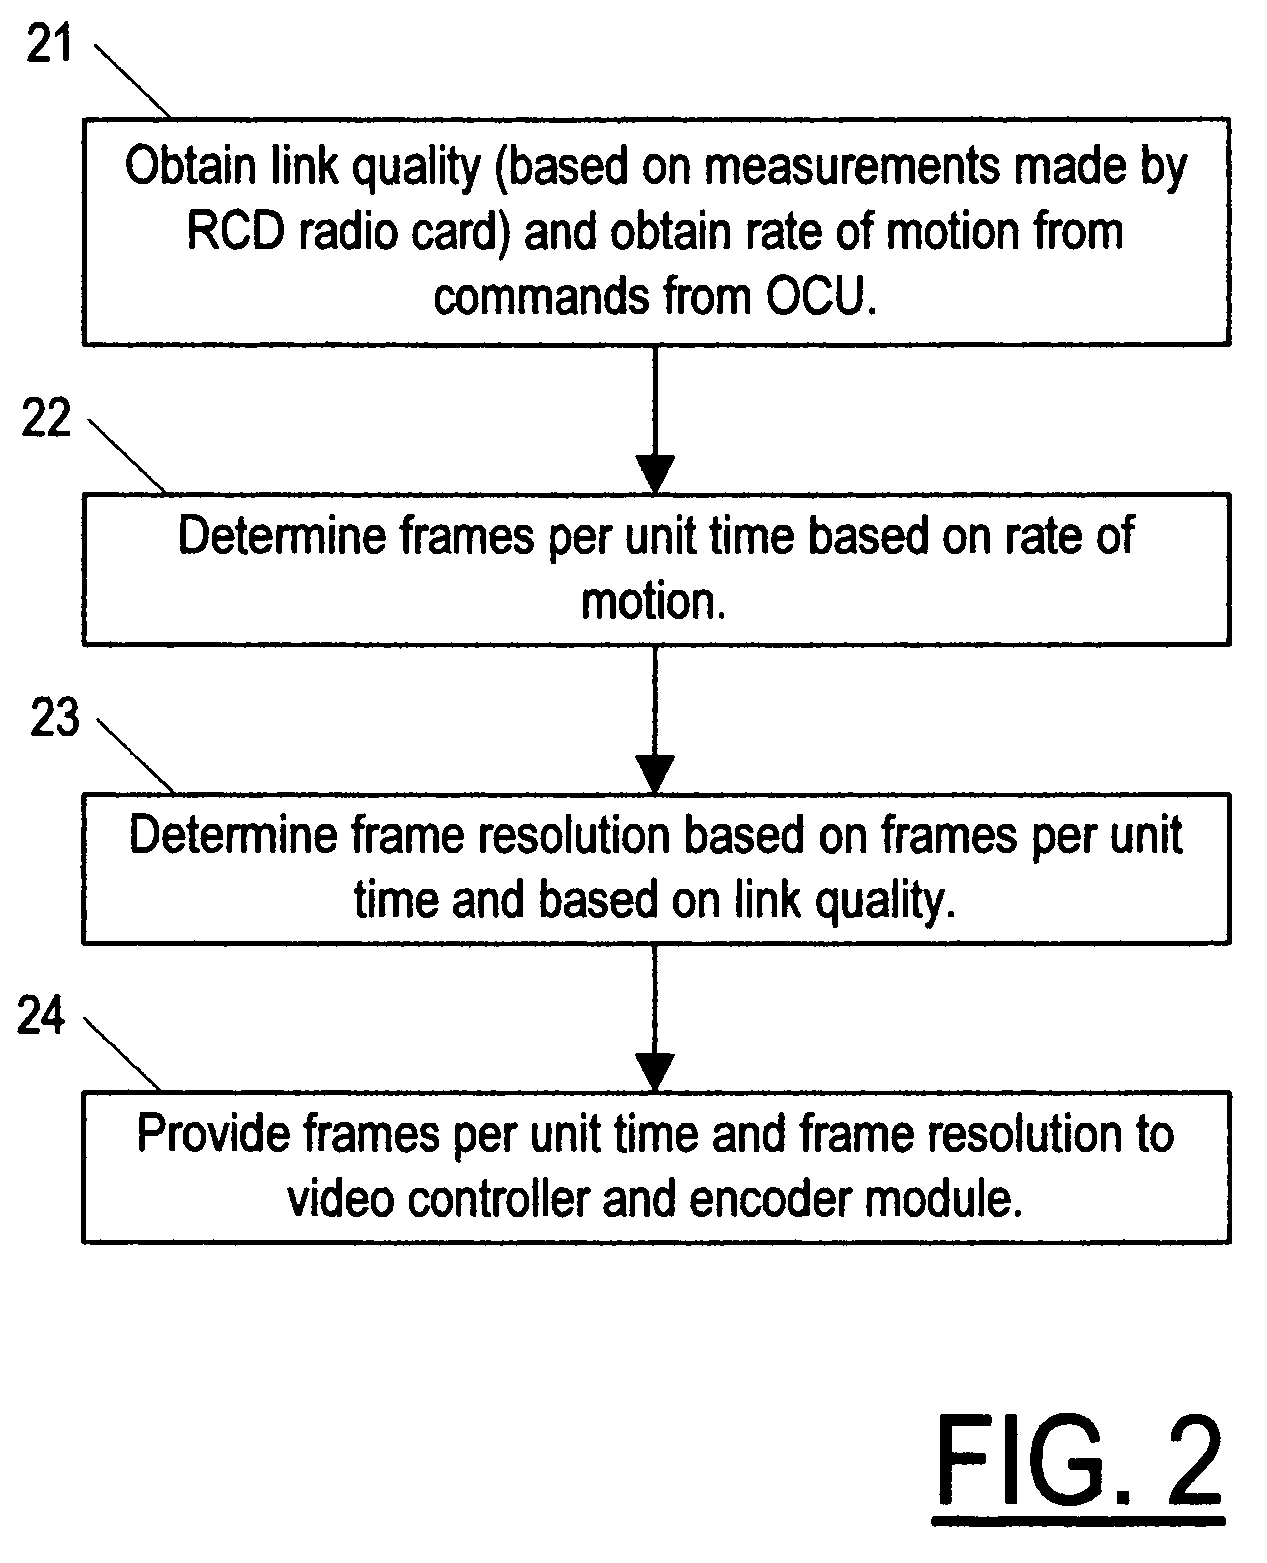 Method and system for adapting use of a radio link between a remotely controlled device and an operator control unit